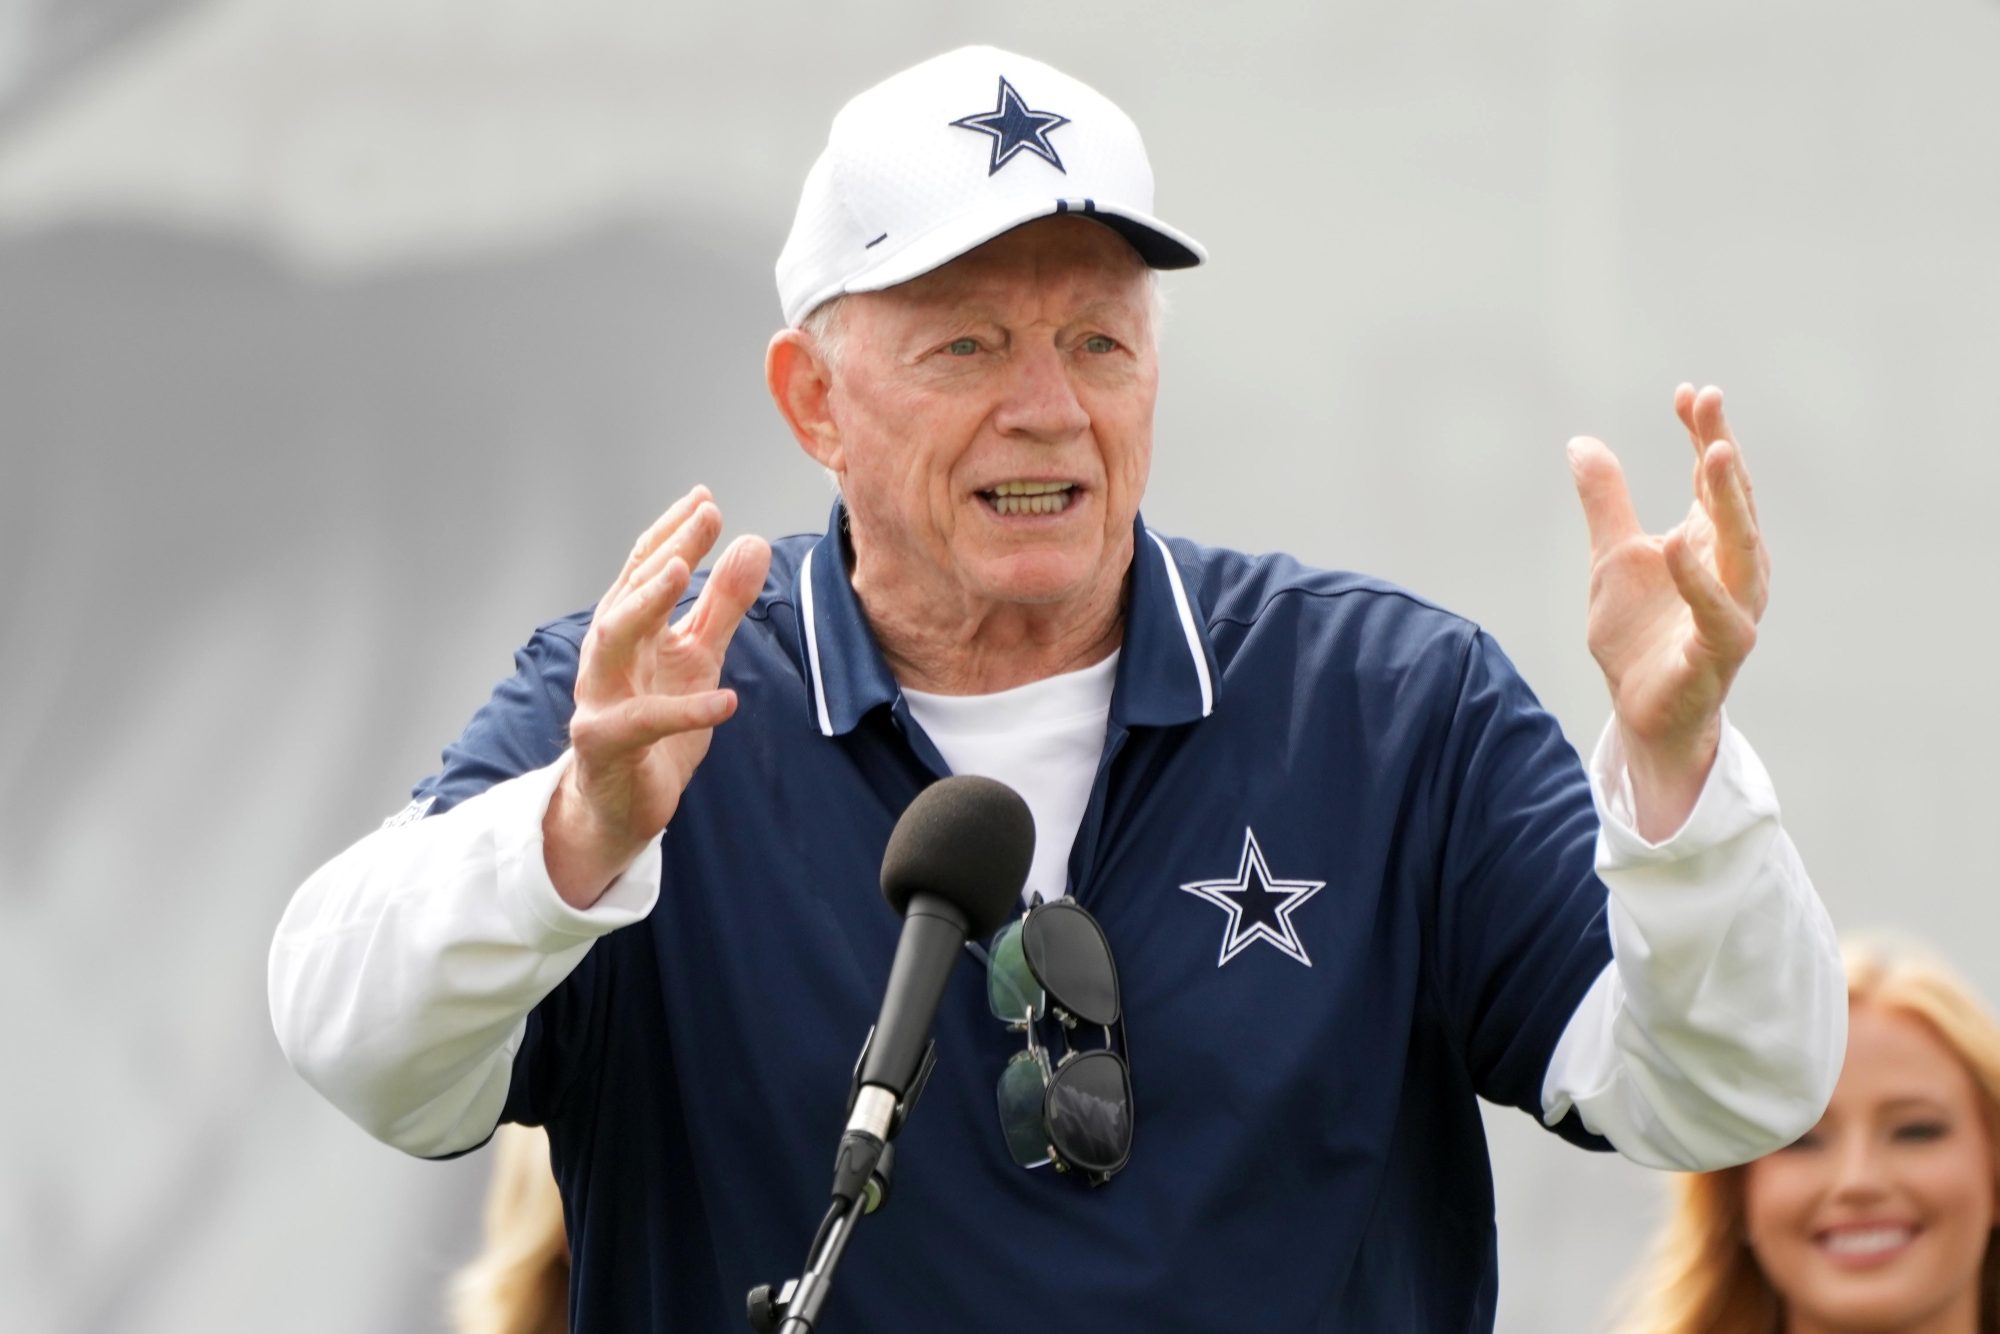 Dallas Cowboys are the most valuable NFL team: Report 